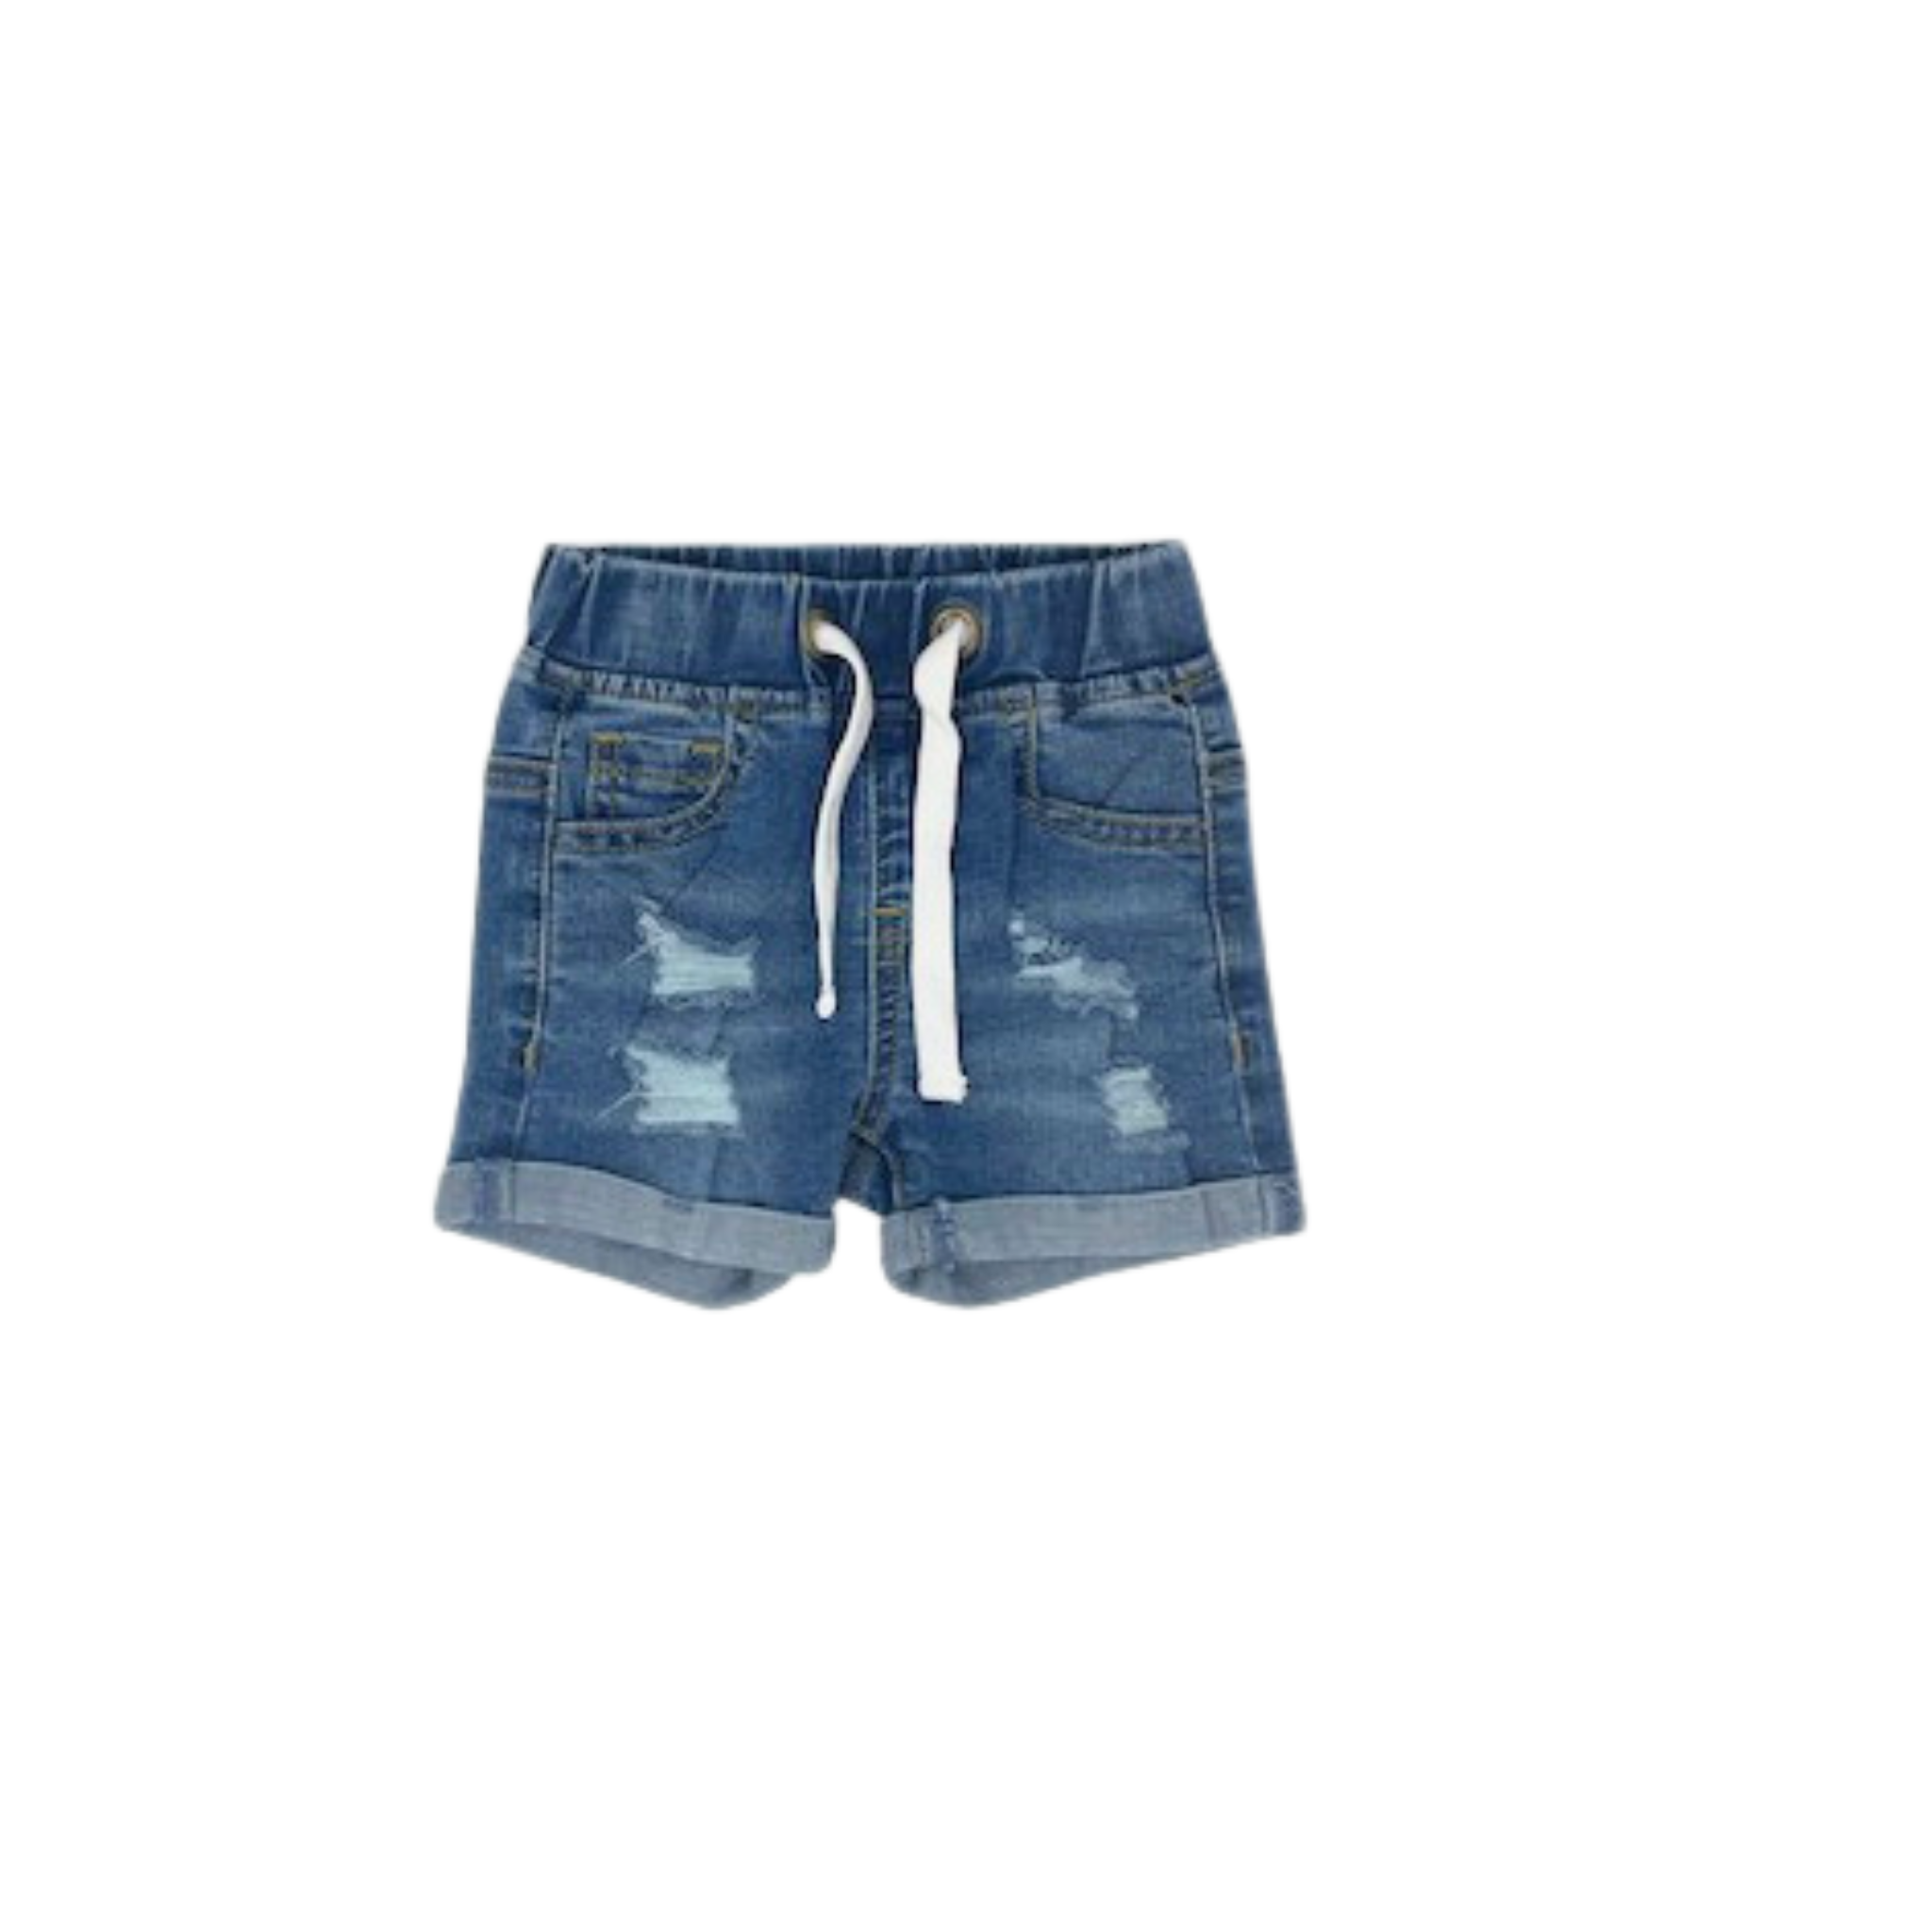 Gender Neutral Distressed Jean Shorts with Drawstring Waist